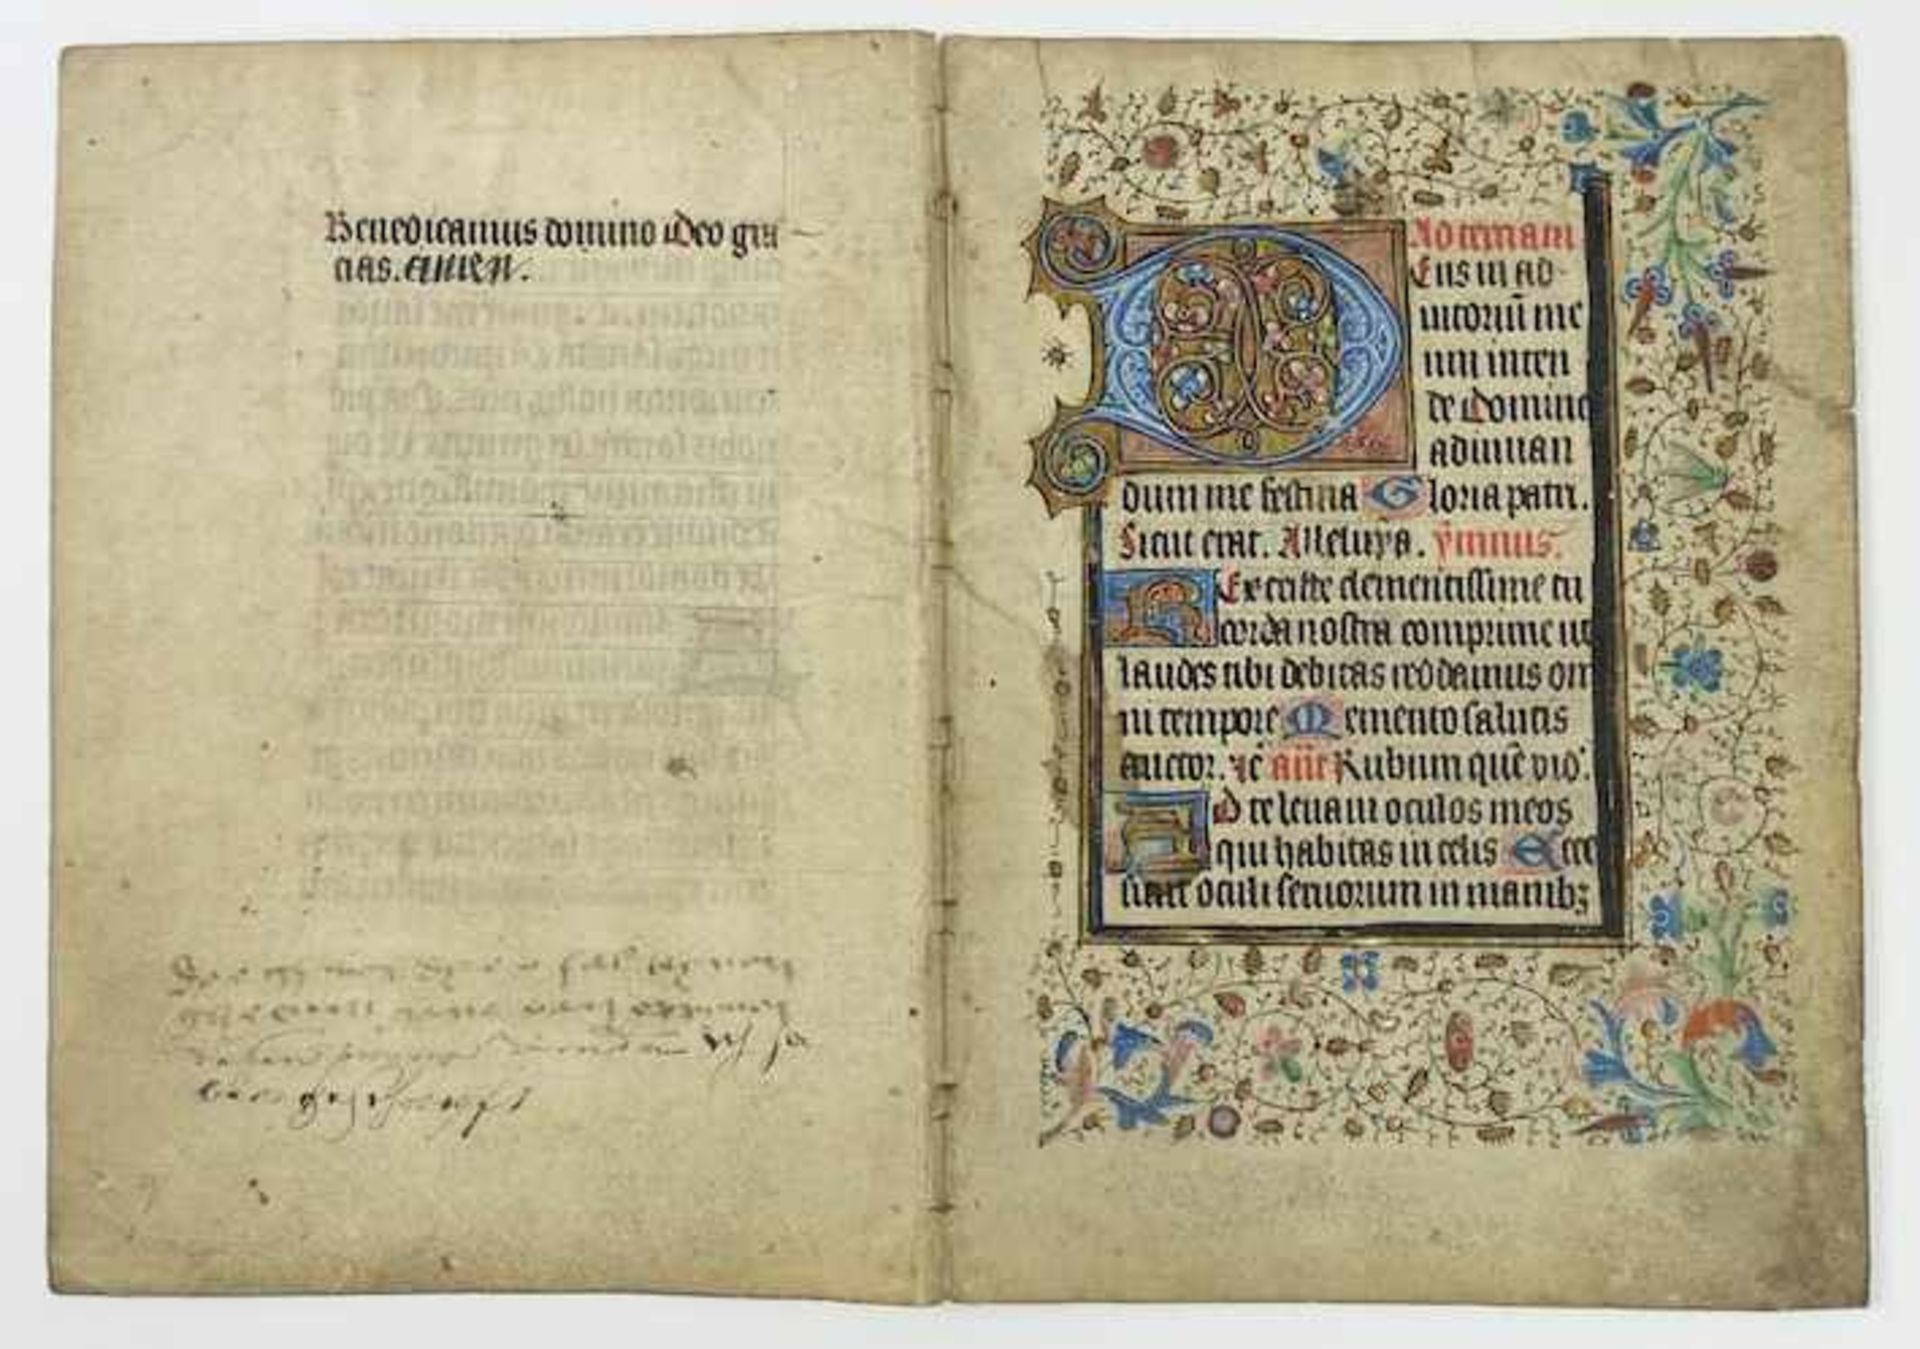 BOOK ILLUSTRATION -- BOOK OF HOURS, Dutch 2nd h. 15th c. 4 pages on 1 leaf. Finely decorated and